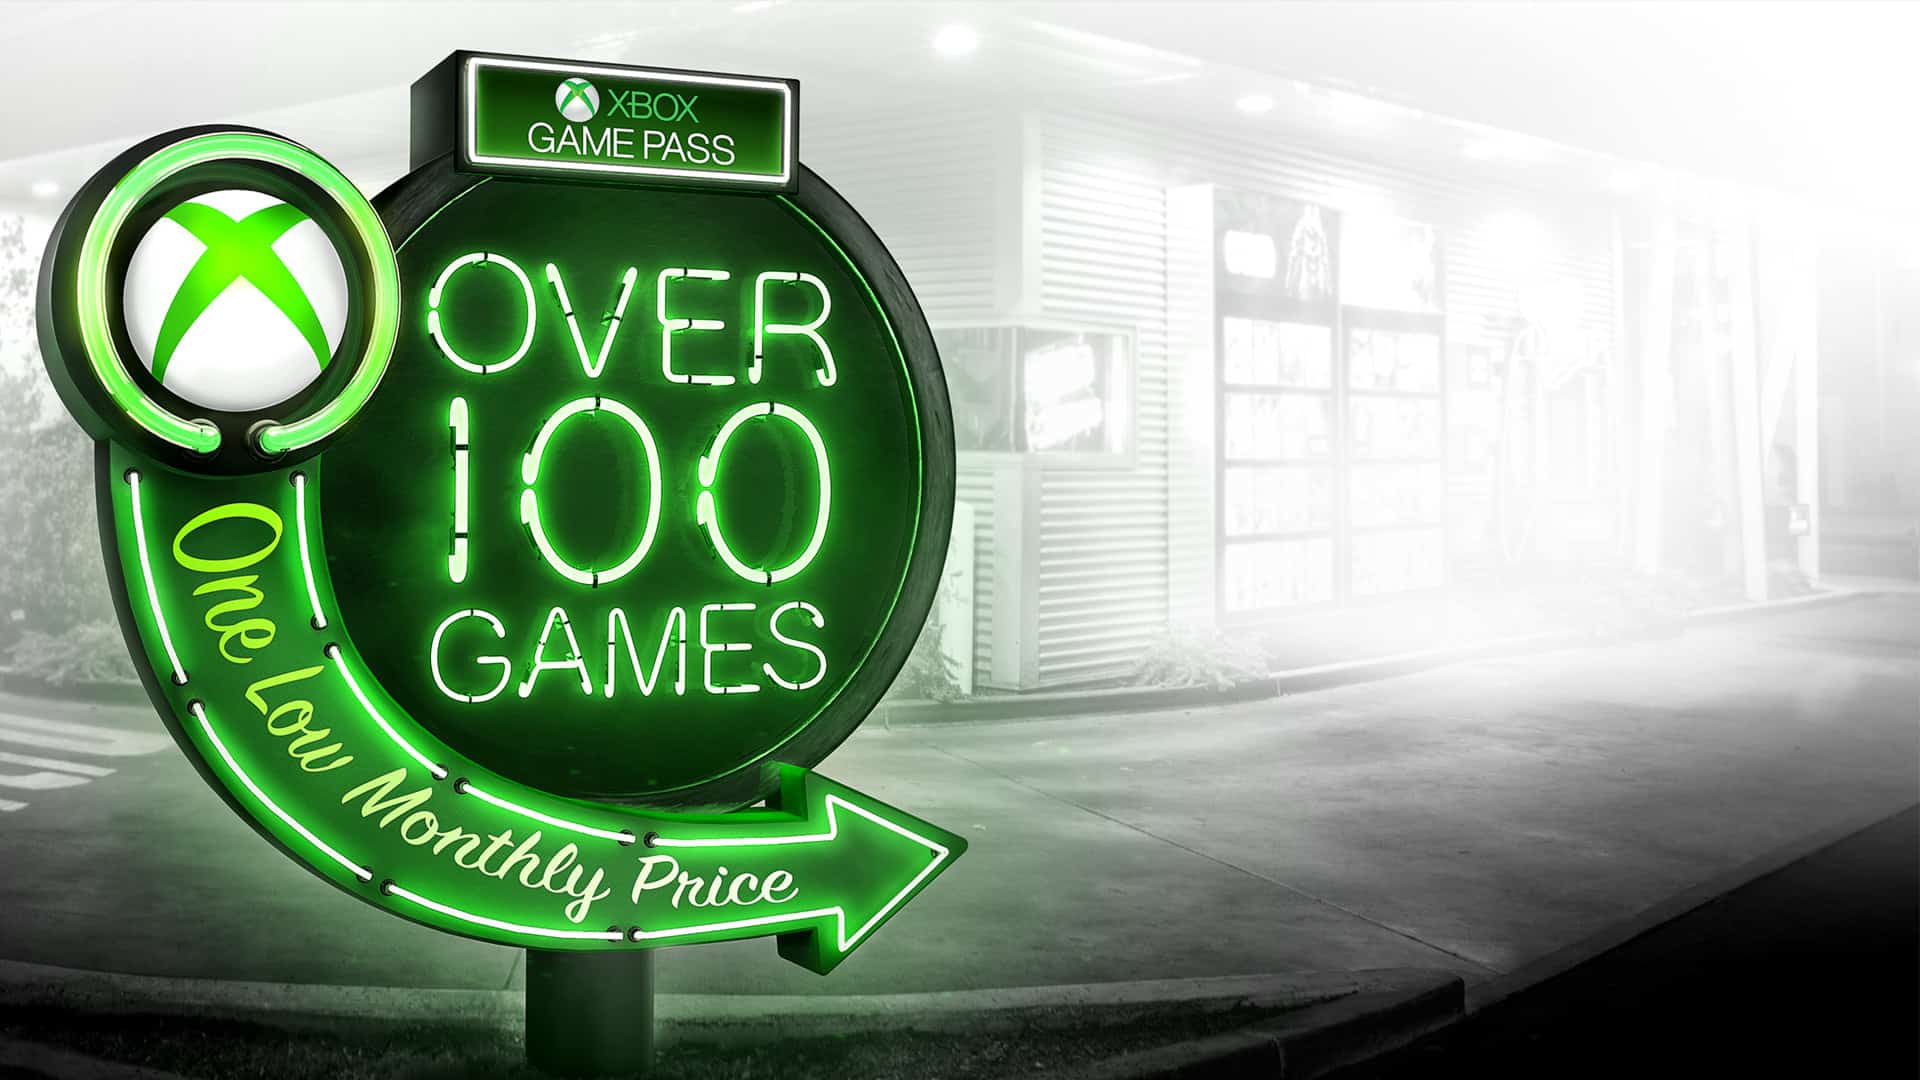 Selling The Vision of Xbox Game Pass